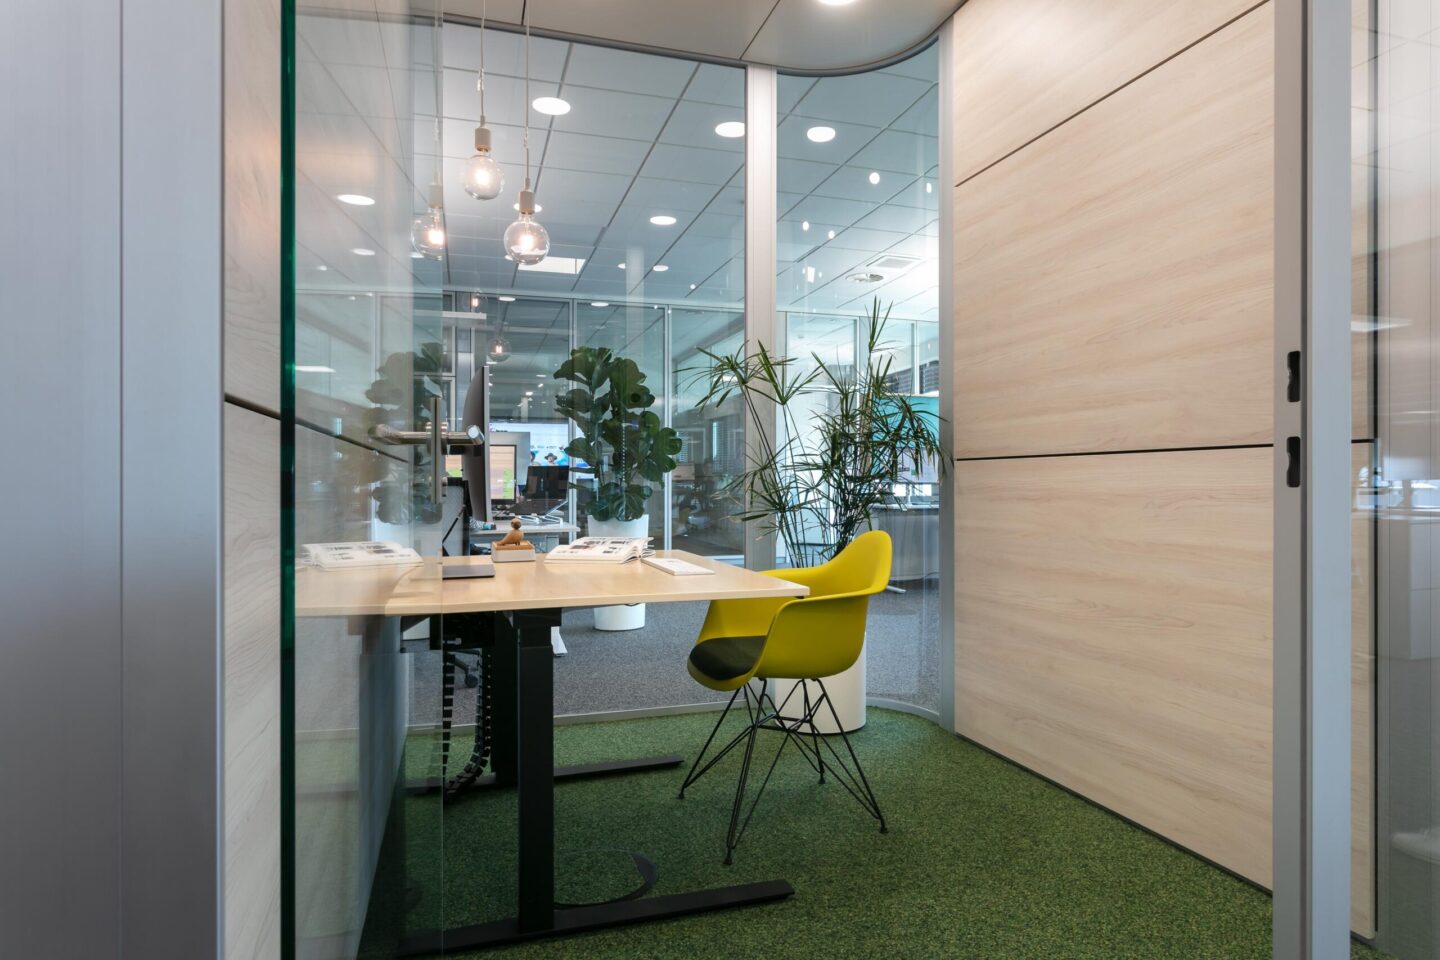 Heo-Campus │ ergonomic working environment │ agile workshop rooms with multifunctional furniture